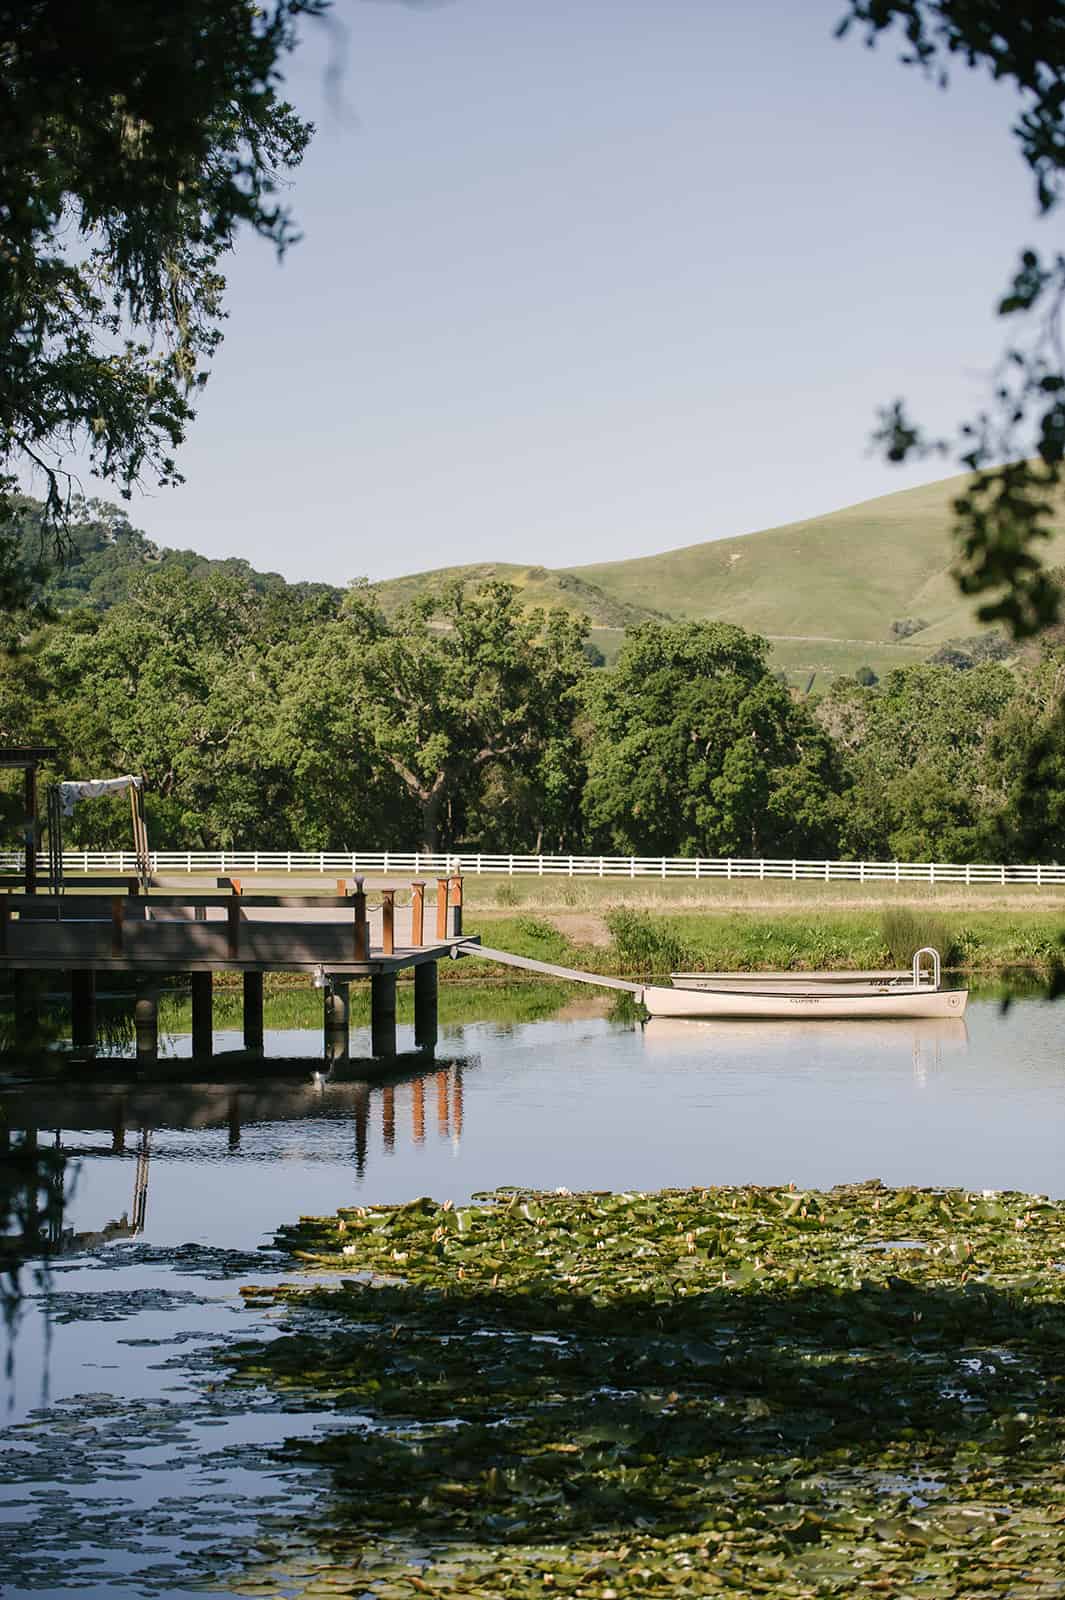 If you follow along on Instagram, you might have seen snippets from my recent trip to Santa Ynez in southern California as we celebrated the launch of Pacific Natural by Jenni Kayne. Today I am excited to share more details and photos! 